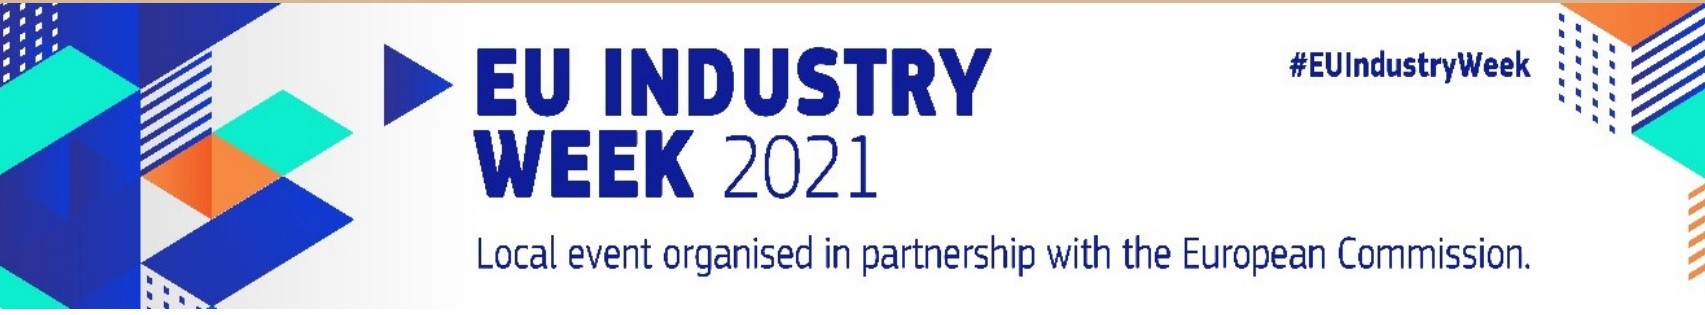 DeCarb was preseneted at EU Industry Week Day 1